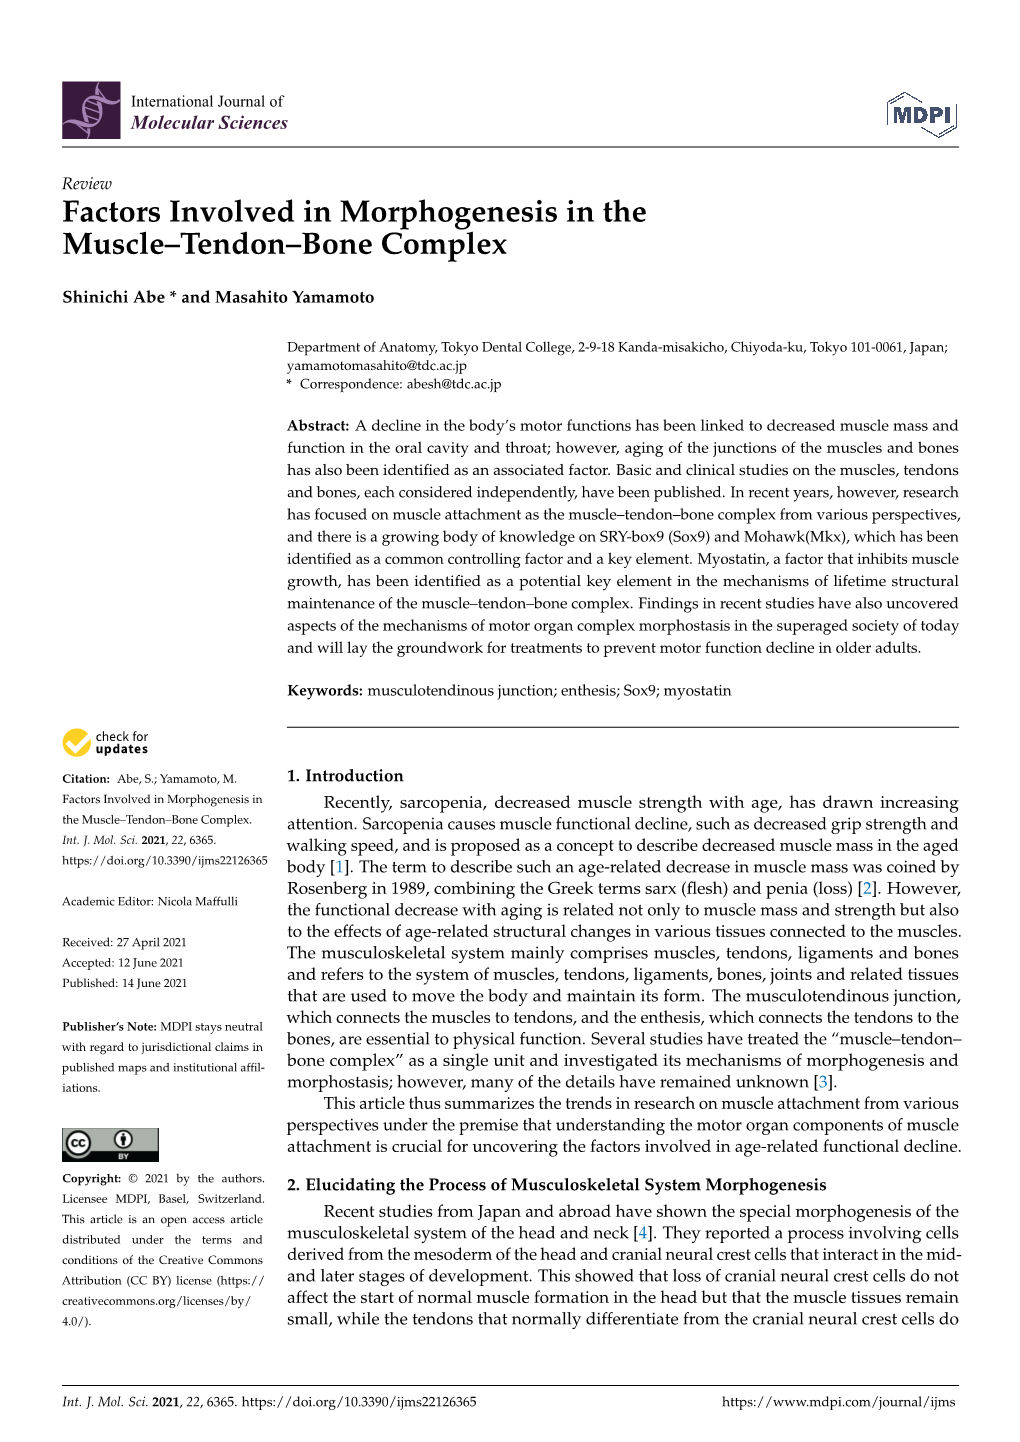 Factors Involved in Morphogenesis in the Muscle–Tendon–Bone Complex